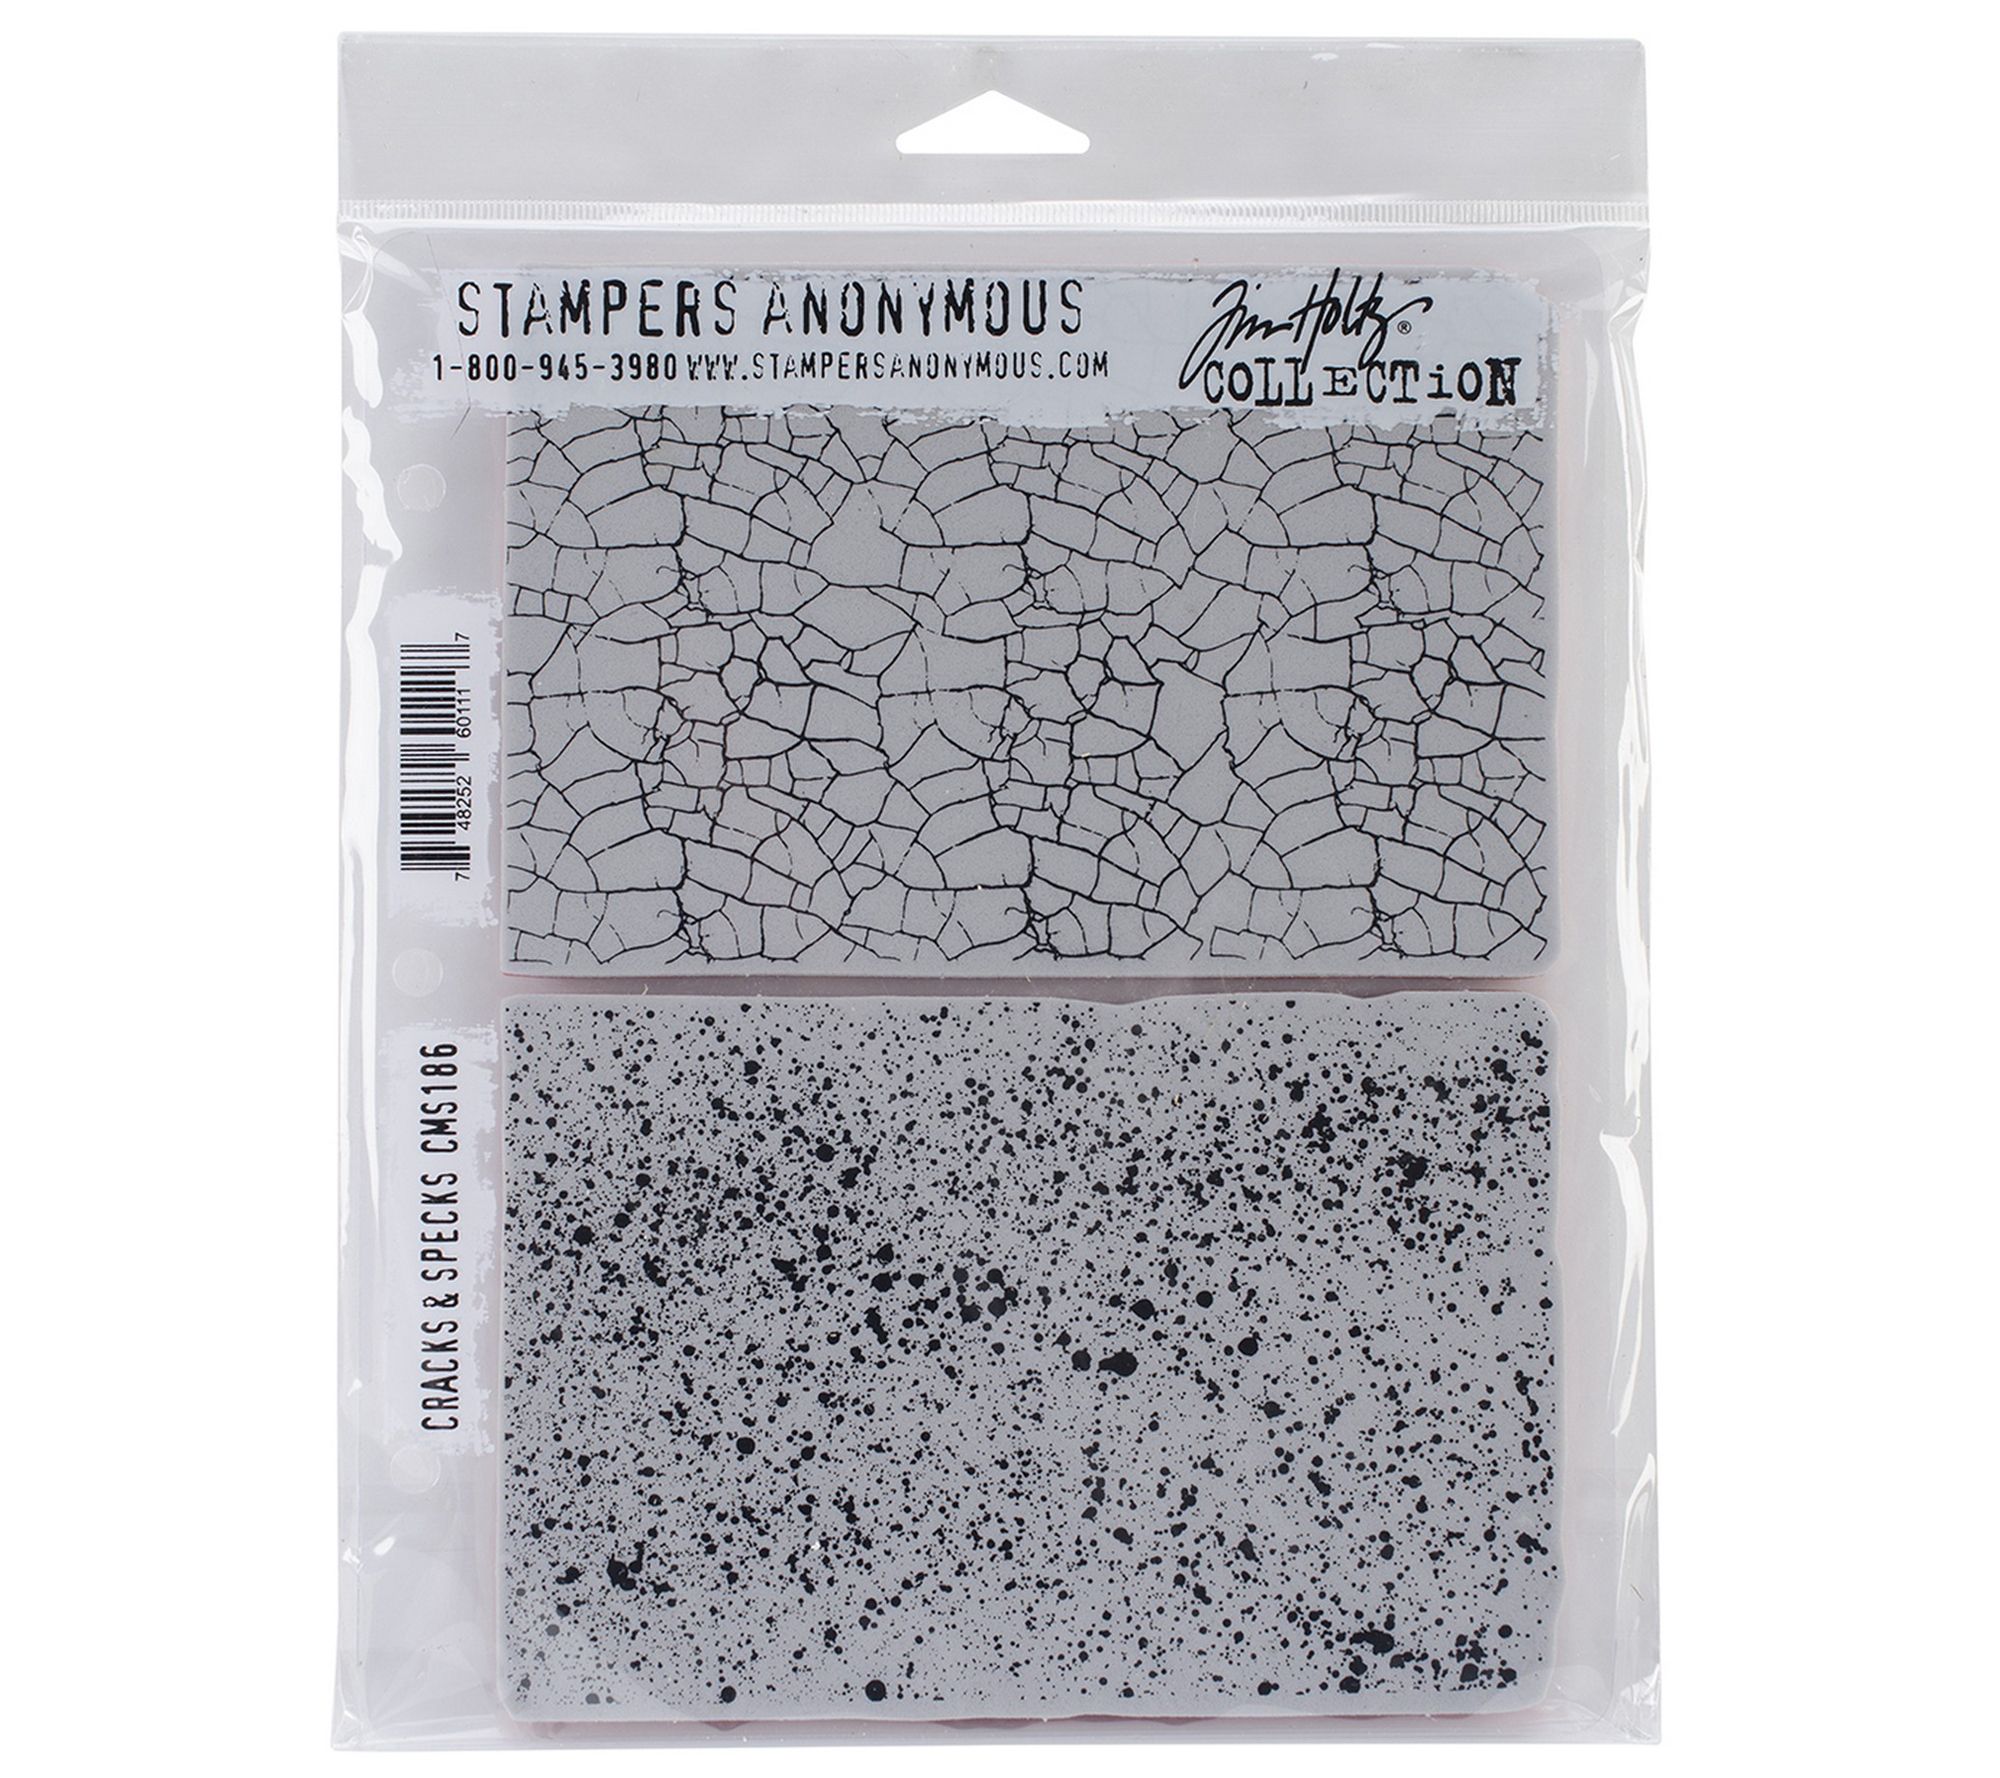 Flutter by Tim Holtz - Cling Mount Stamps - Stampers Anonymous - Sizzix